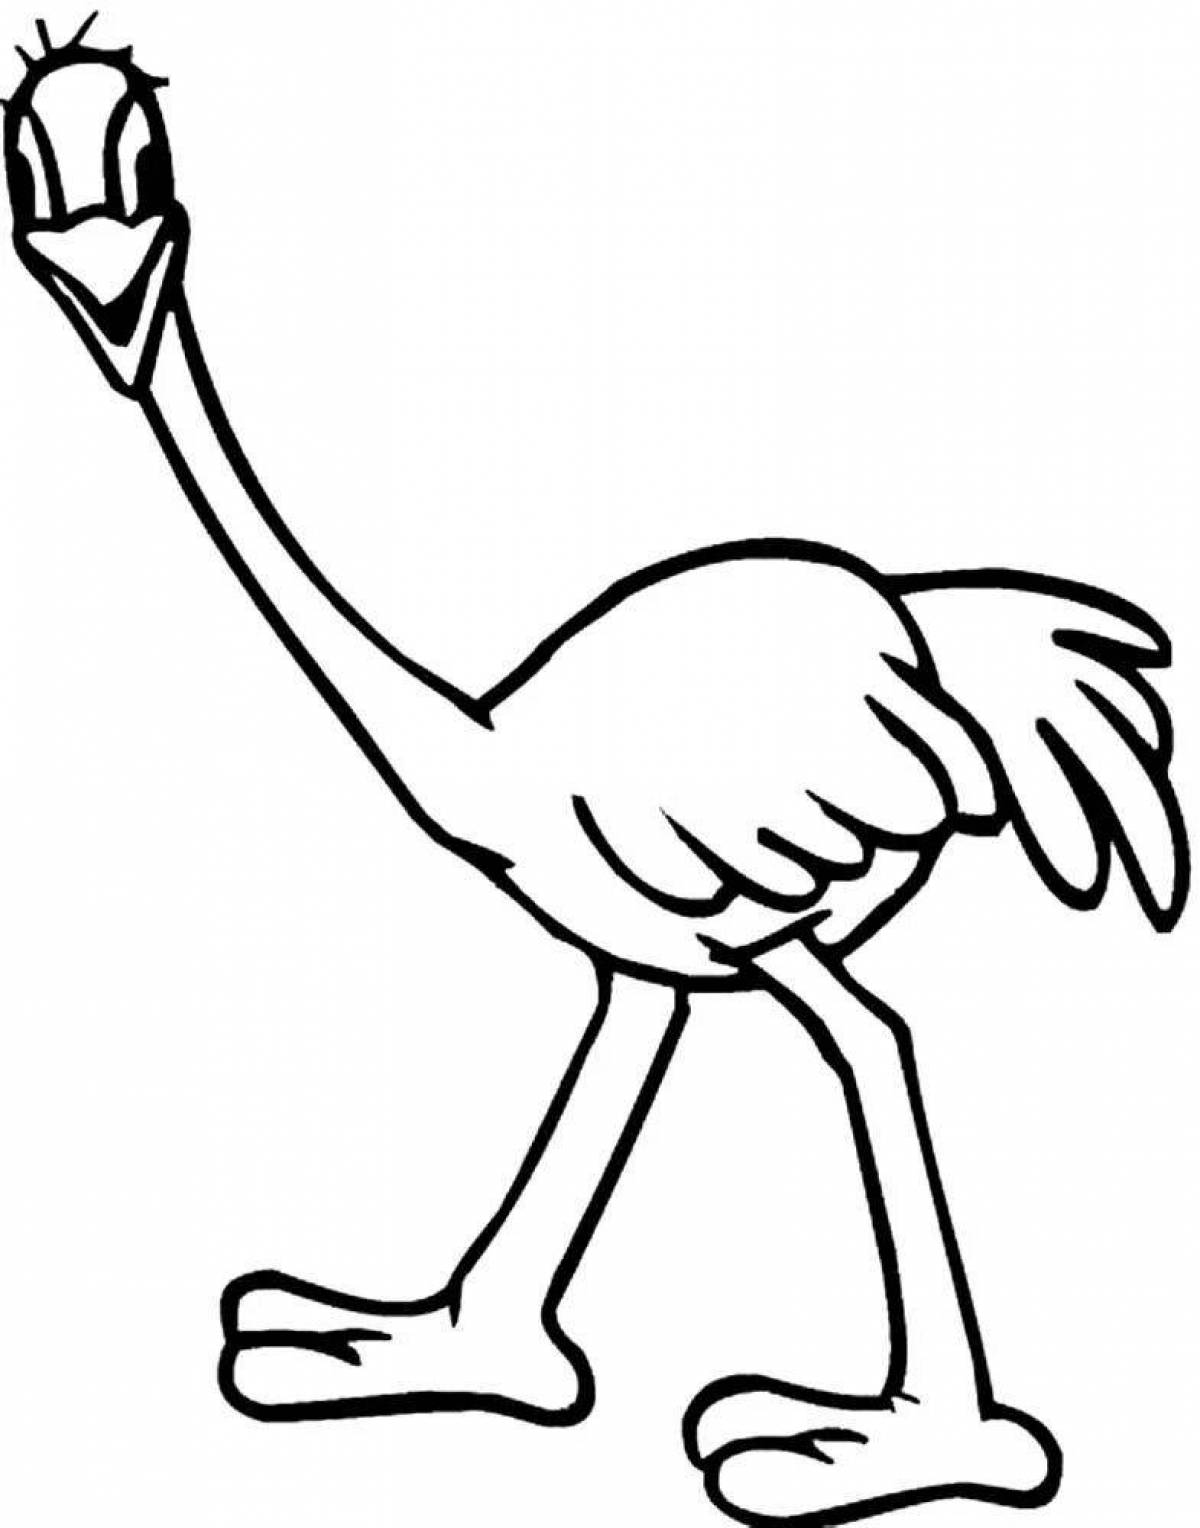 Colorful emu coloring page